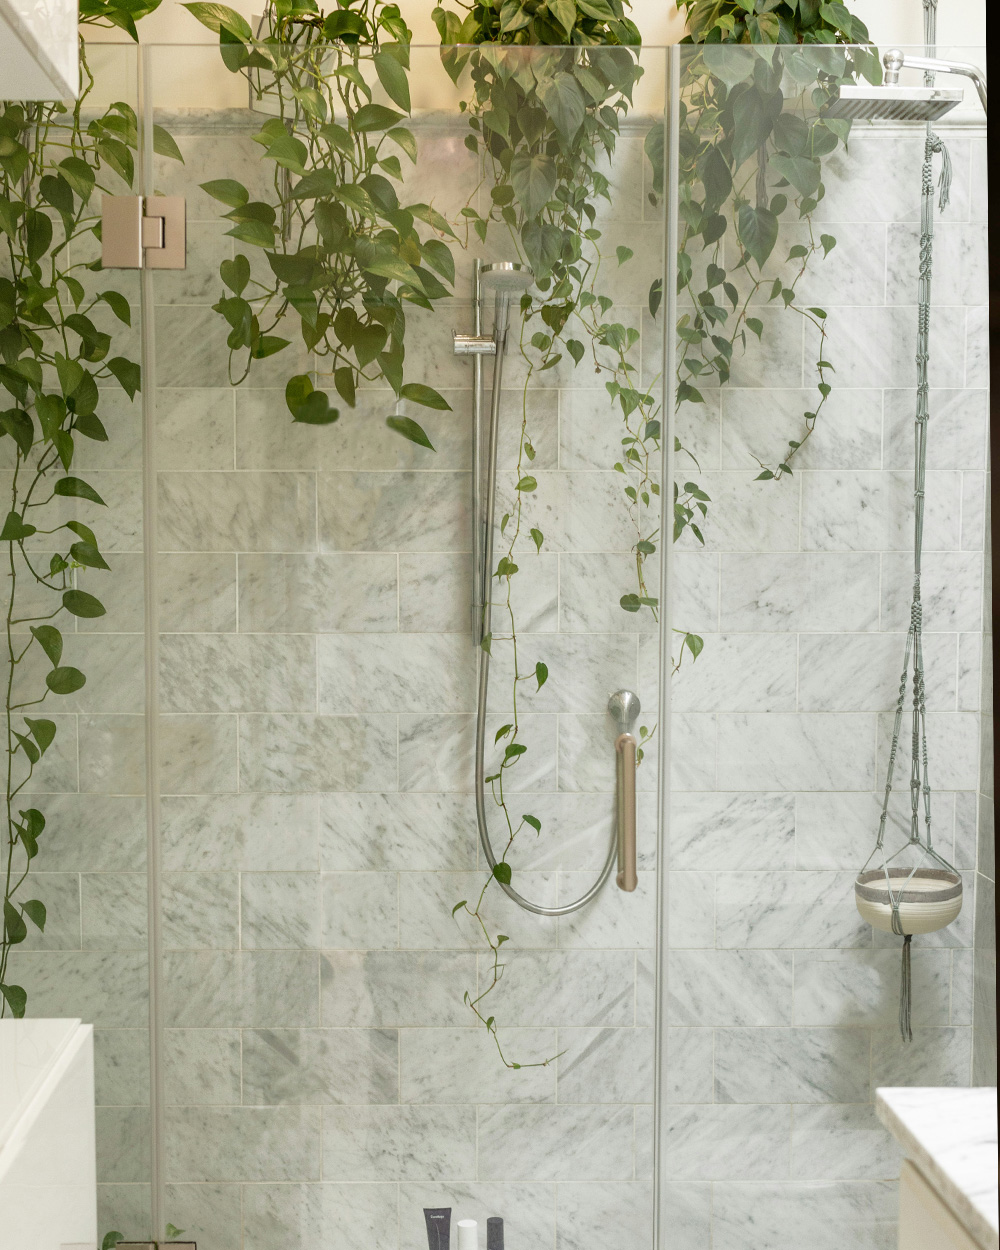 Marble-tile shower with silver shower heads, hanging pot, and lush green hanging plants.